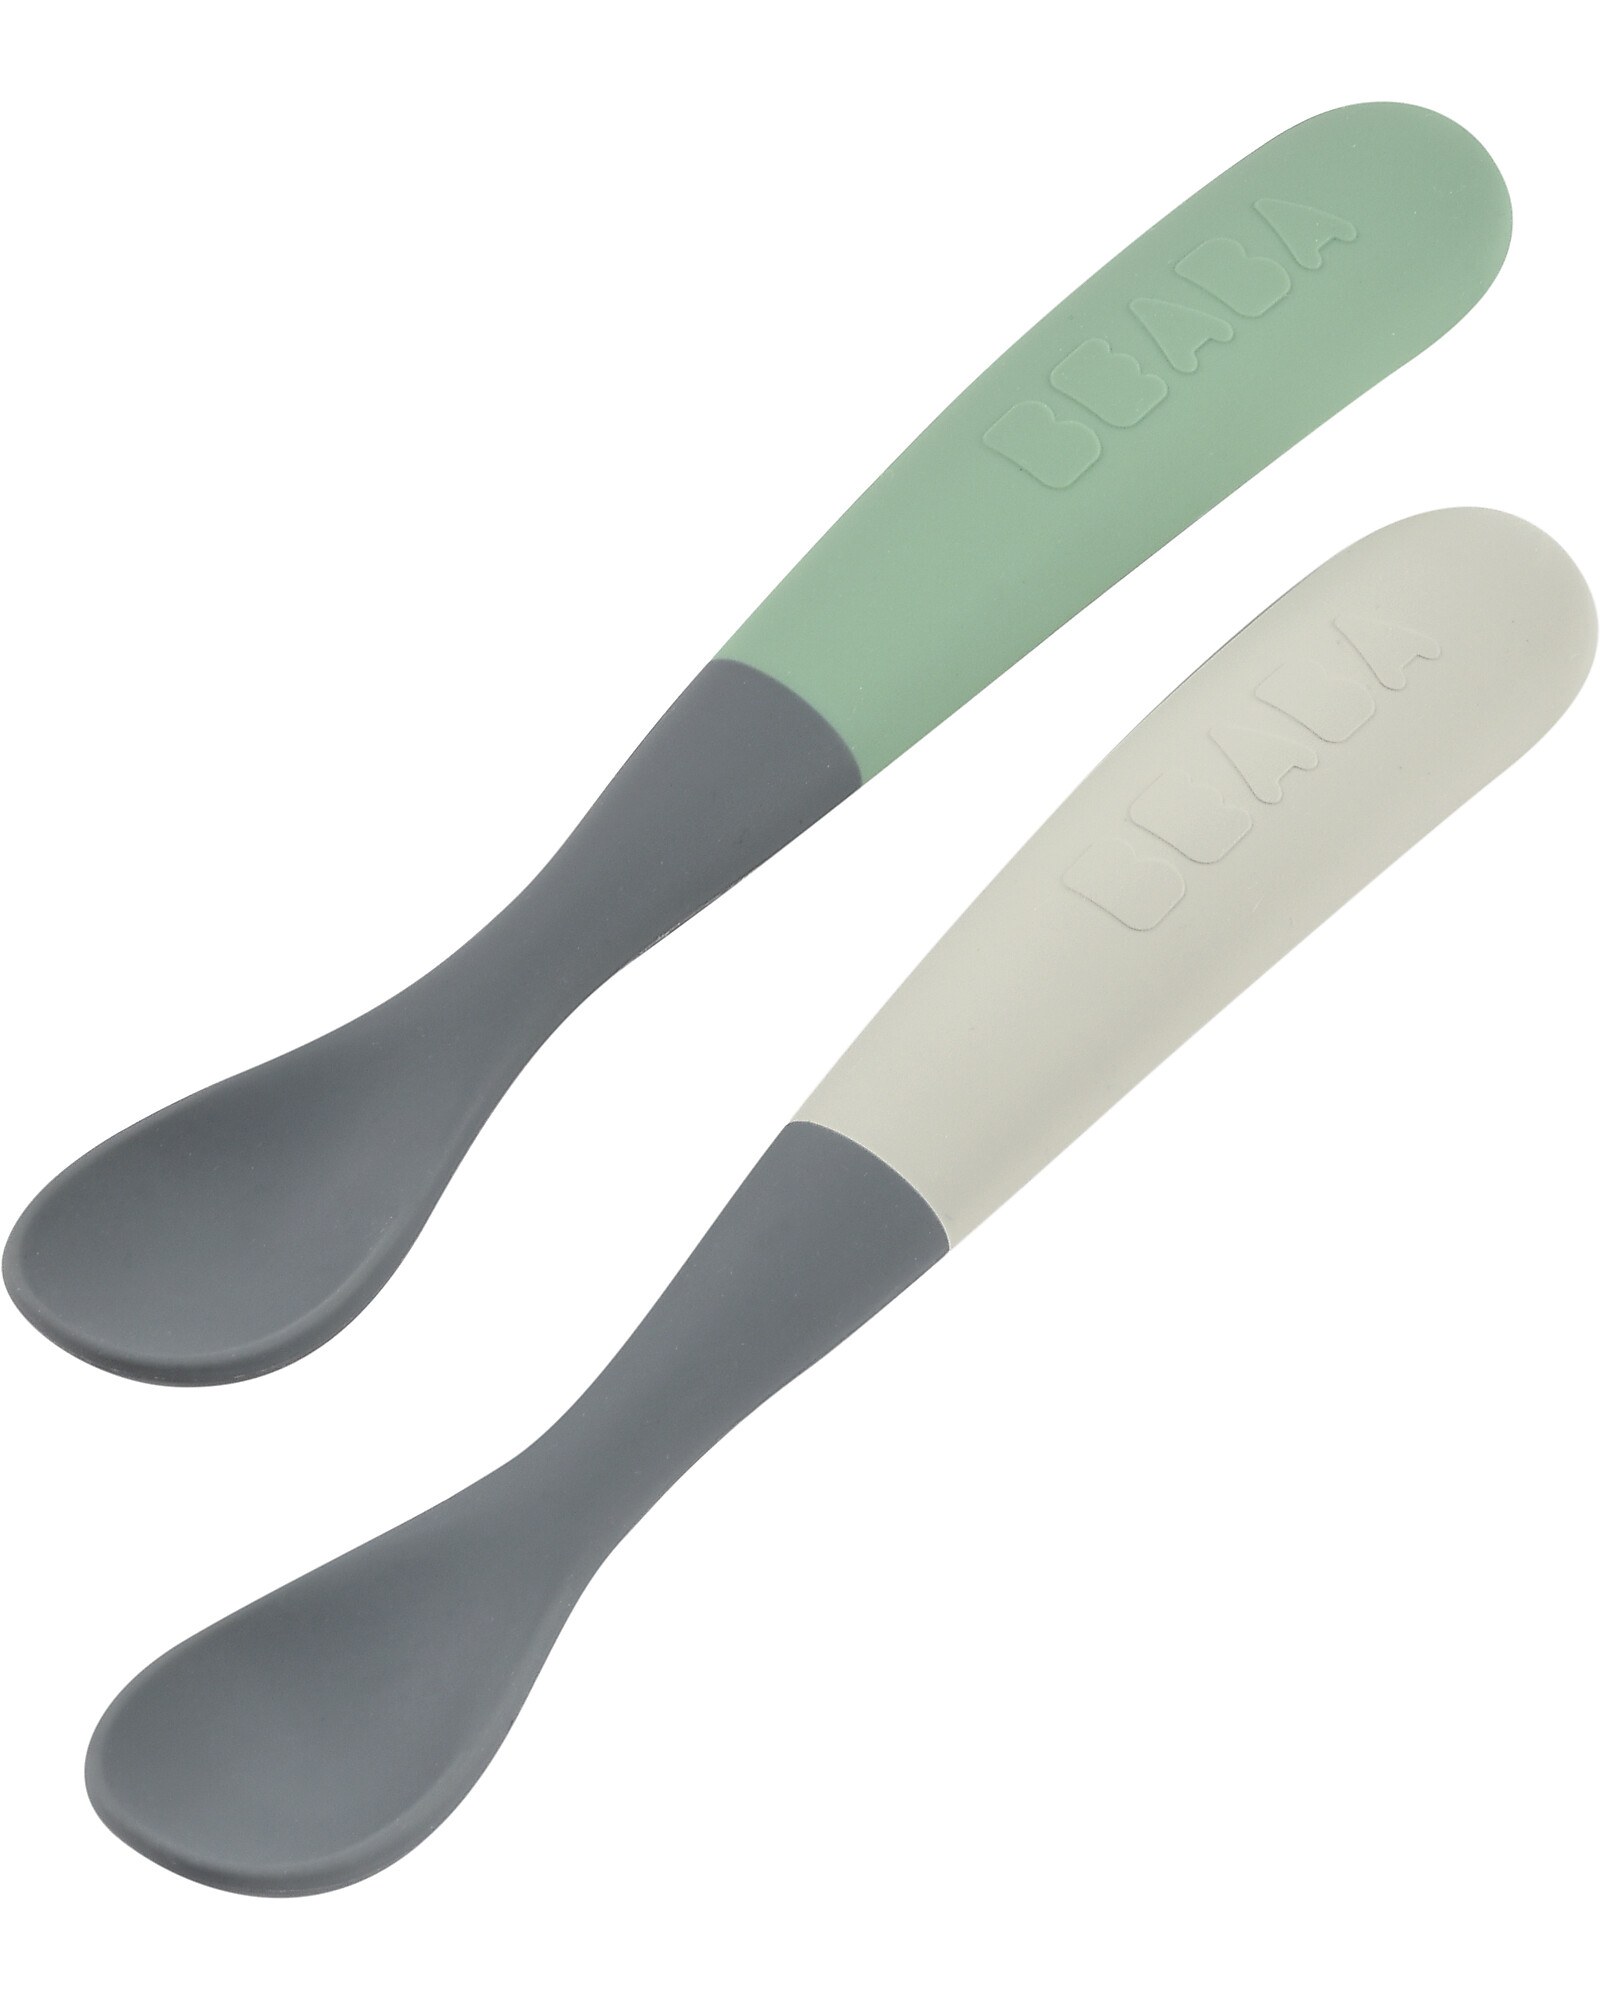 https://data.family-nation.com/imgprodotto/b%C3%A9aba-2-ergonomic-1st-age-spoons-set-with-case-silicone-grey-and-sage-handy-for-adults-and-delicate-for-children-cutlery_492222_zoom.jpg